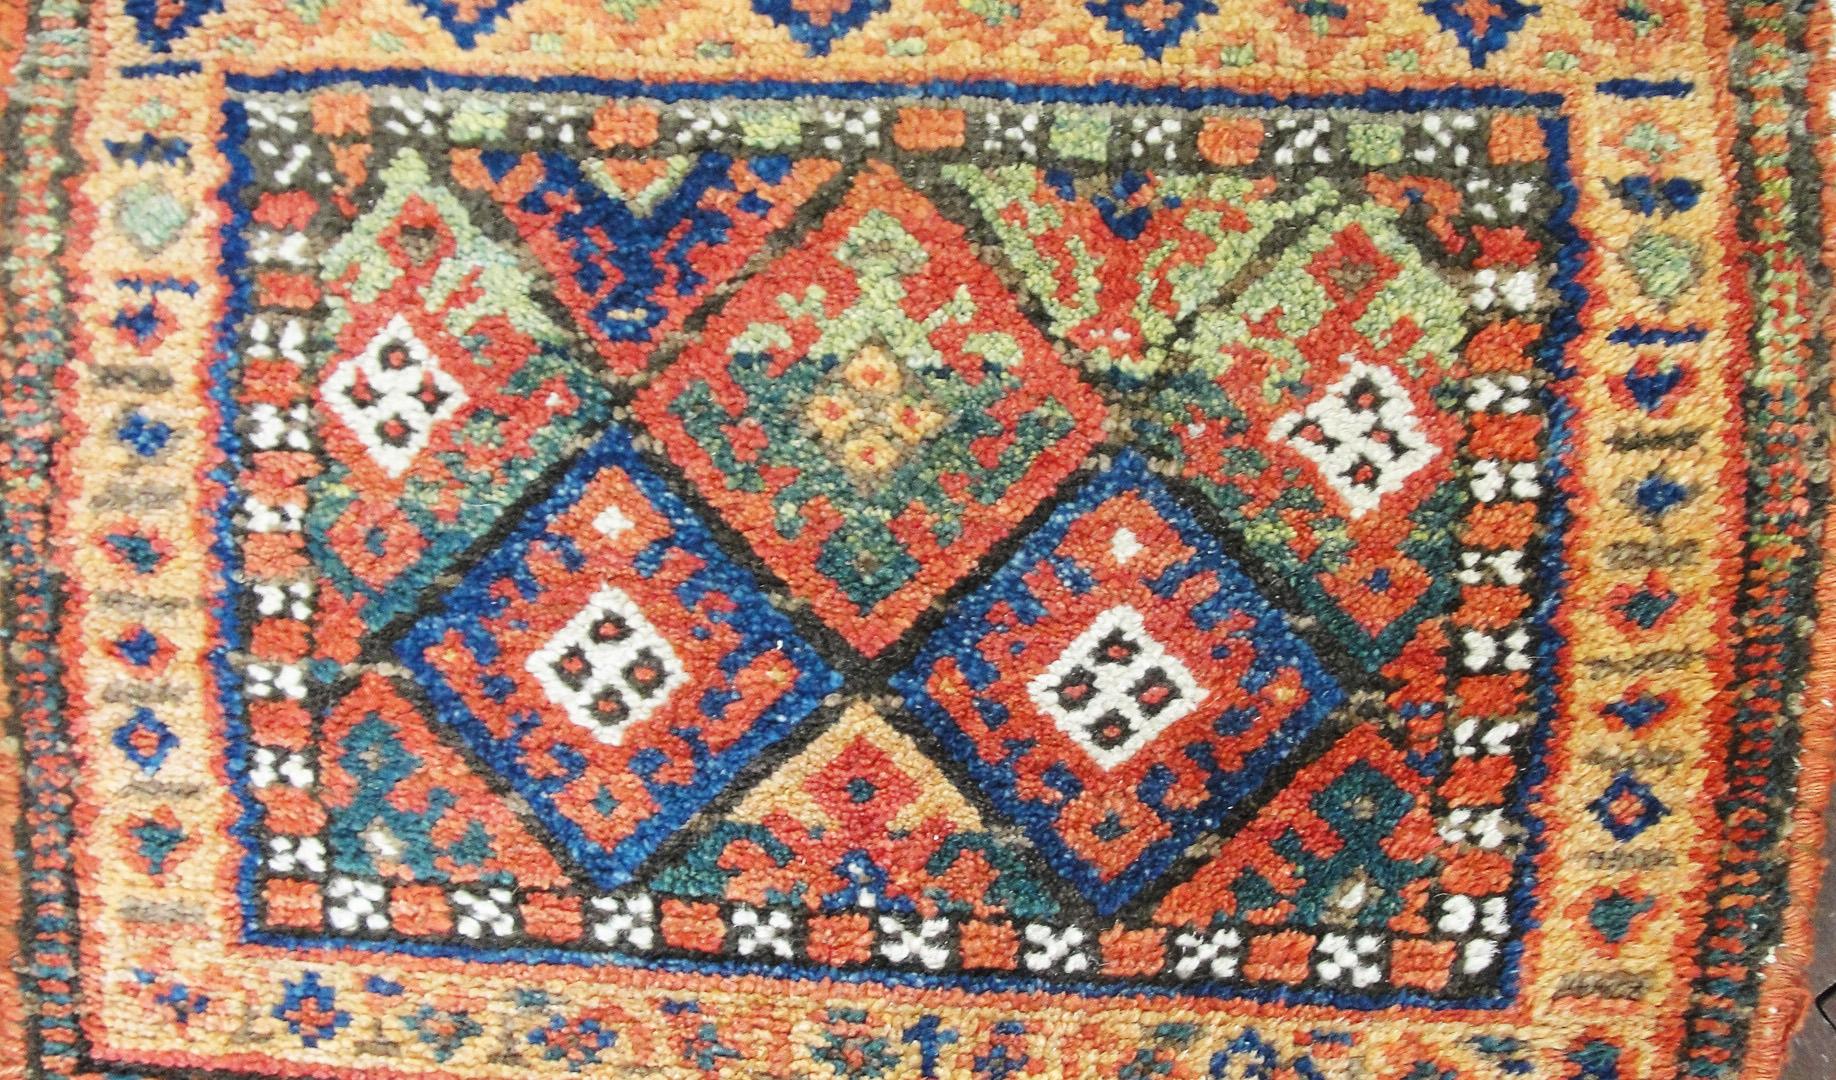 This is an authentic handmade rug. It was made in Kurdish town circa 1910s or before. The materials are wool pile with cotton foundation. The colors are from vegetable dyes, and the general pattern is geometric design inside two borders.
The